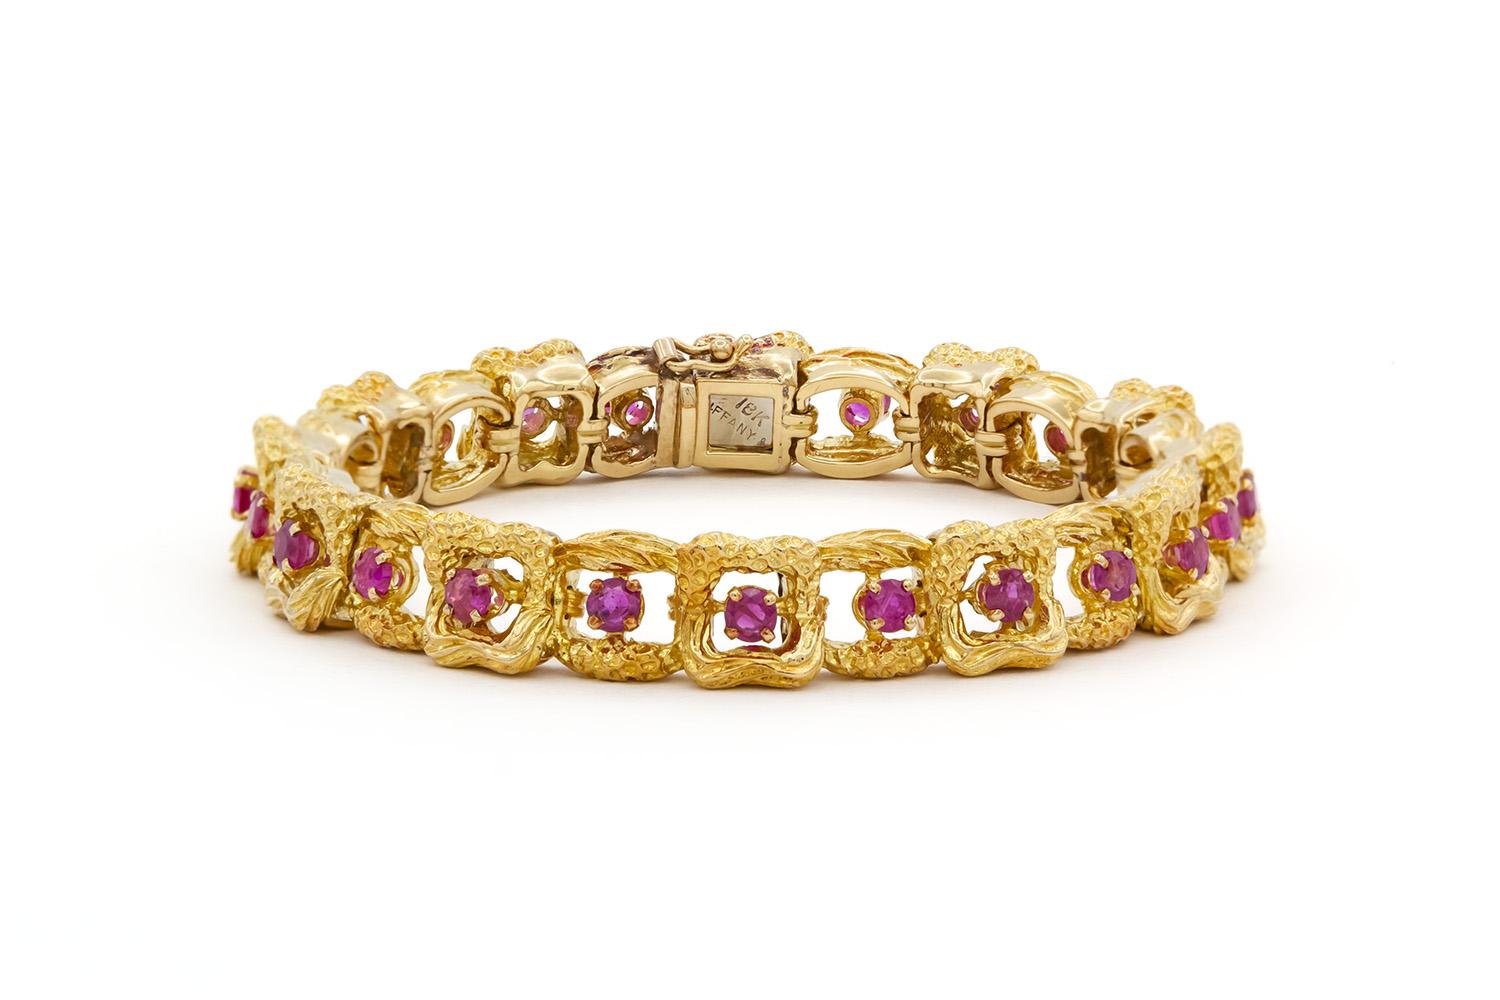 We are pleased to offer this Vintage Tiffany & Co. 18k Yellow Gold & Ruby Link Bracelet. In classic Tiffany style this bracelet is finely crafted from 18k yellow gold and features 24 round single cut rubies estimated at 2.75ctw. Unique and elegant,